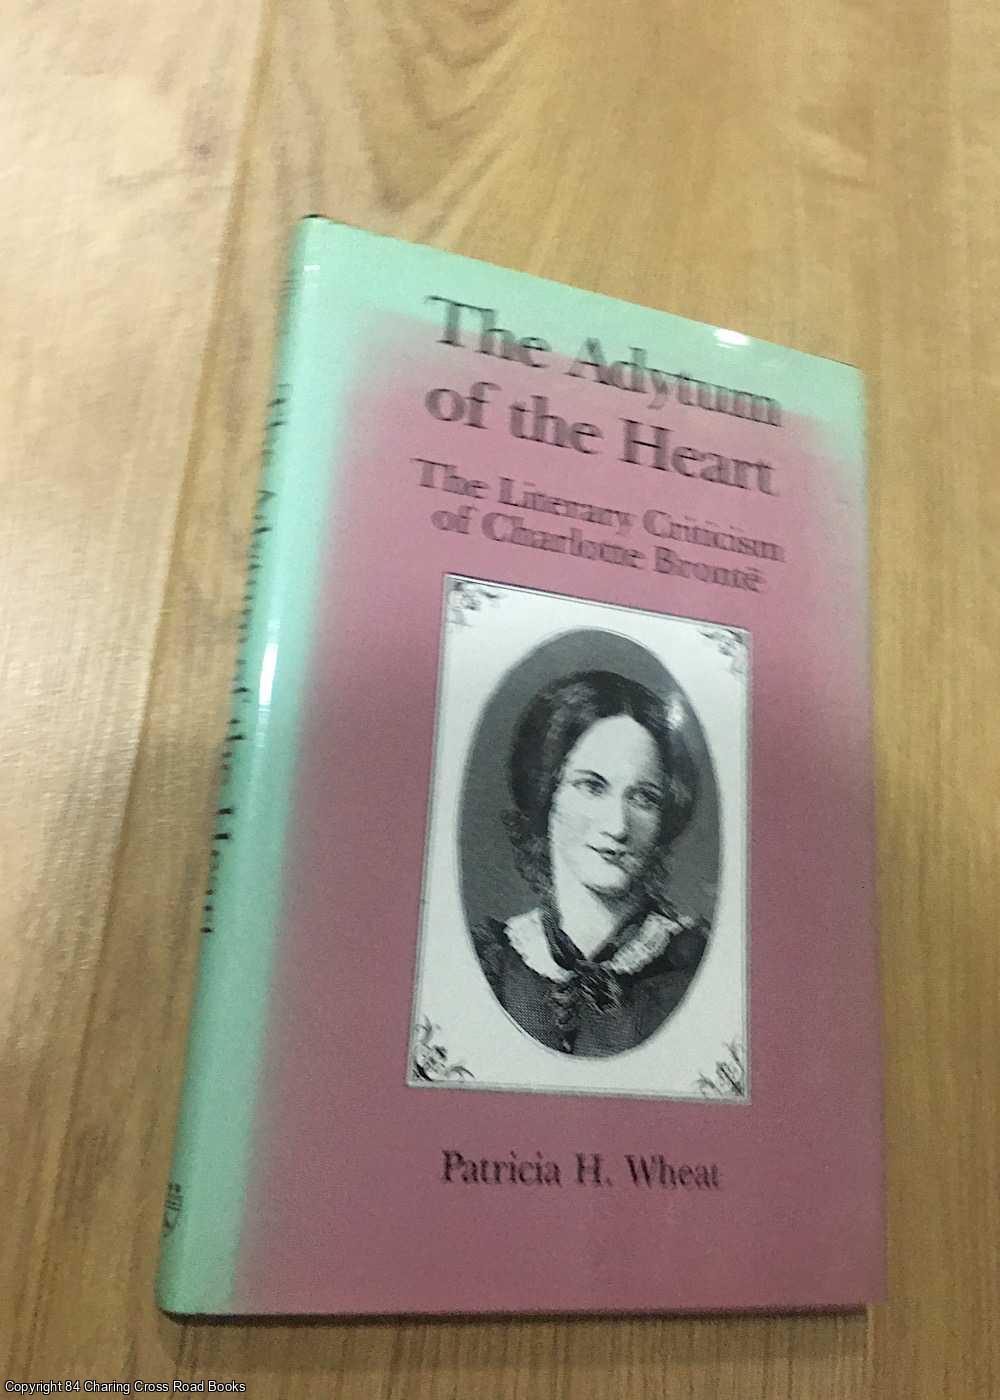 Wheat, Patricia H. - The Adytum of the Heart: Literary Criticism of Charlotte Bronte